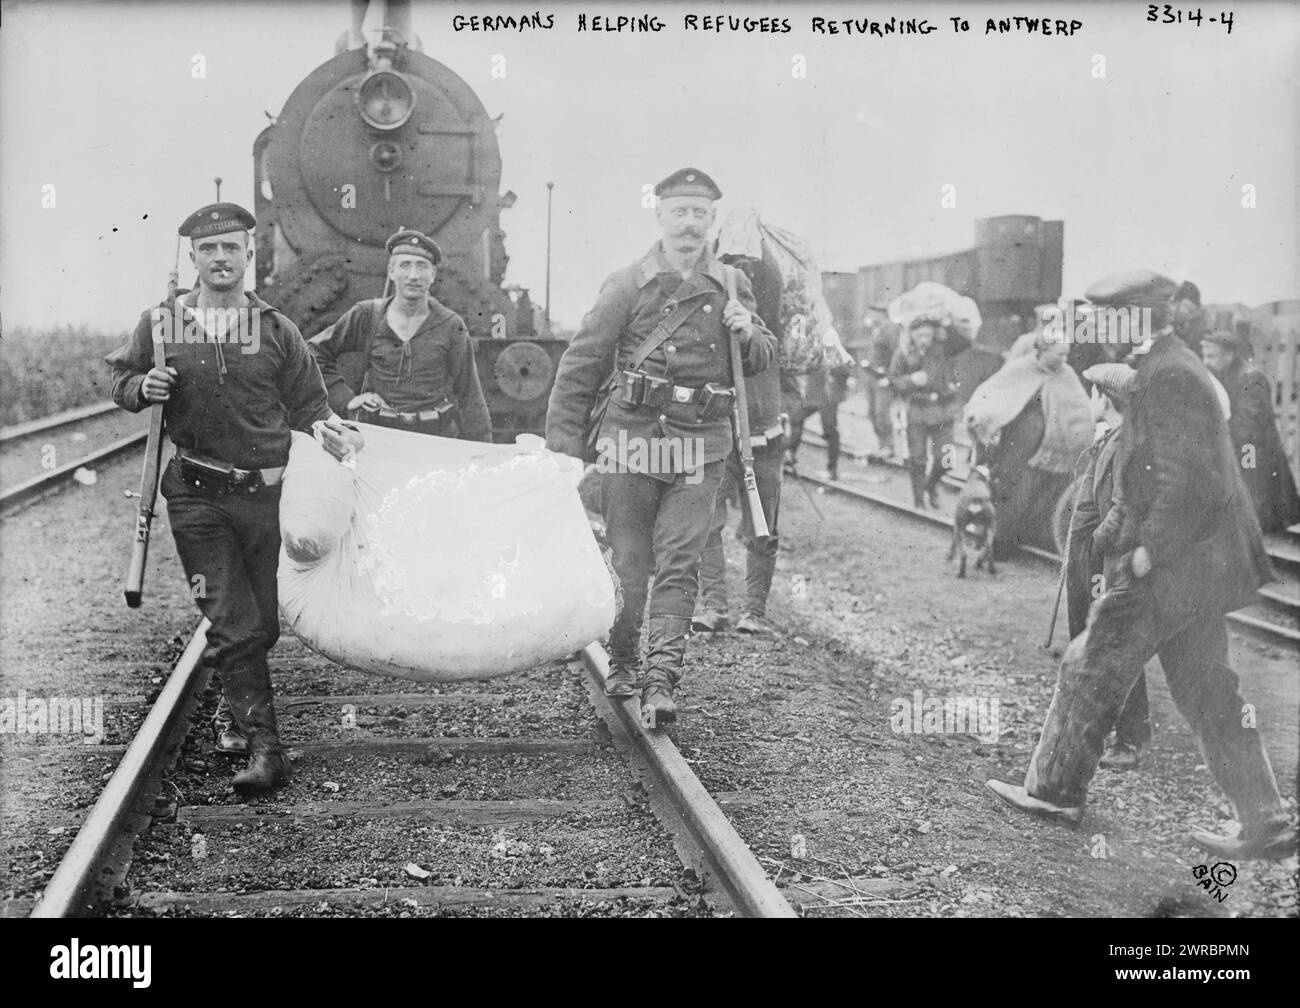 Germans helping refugees returning to Antwerp, Photograph shows German soldiers on train tracks carrying bundle for Belgian refugees in Antwerp, Belgium during World War I., 1914, World War, 1914-1918, Glass negatives, 1 negative: glass Stock Photo